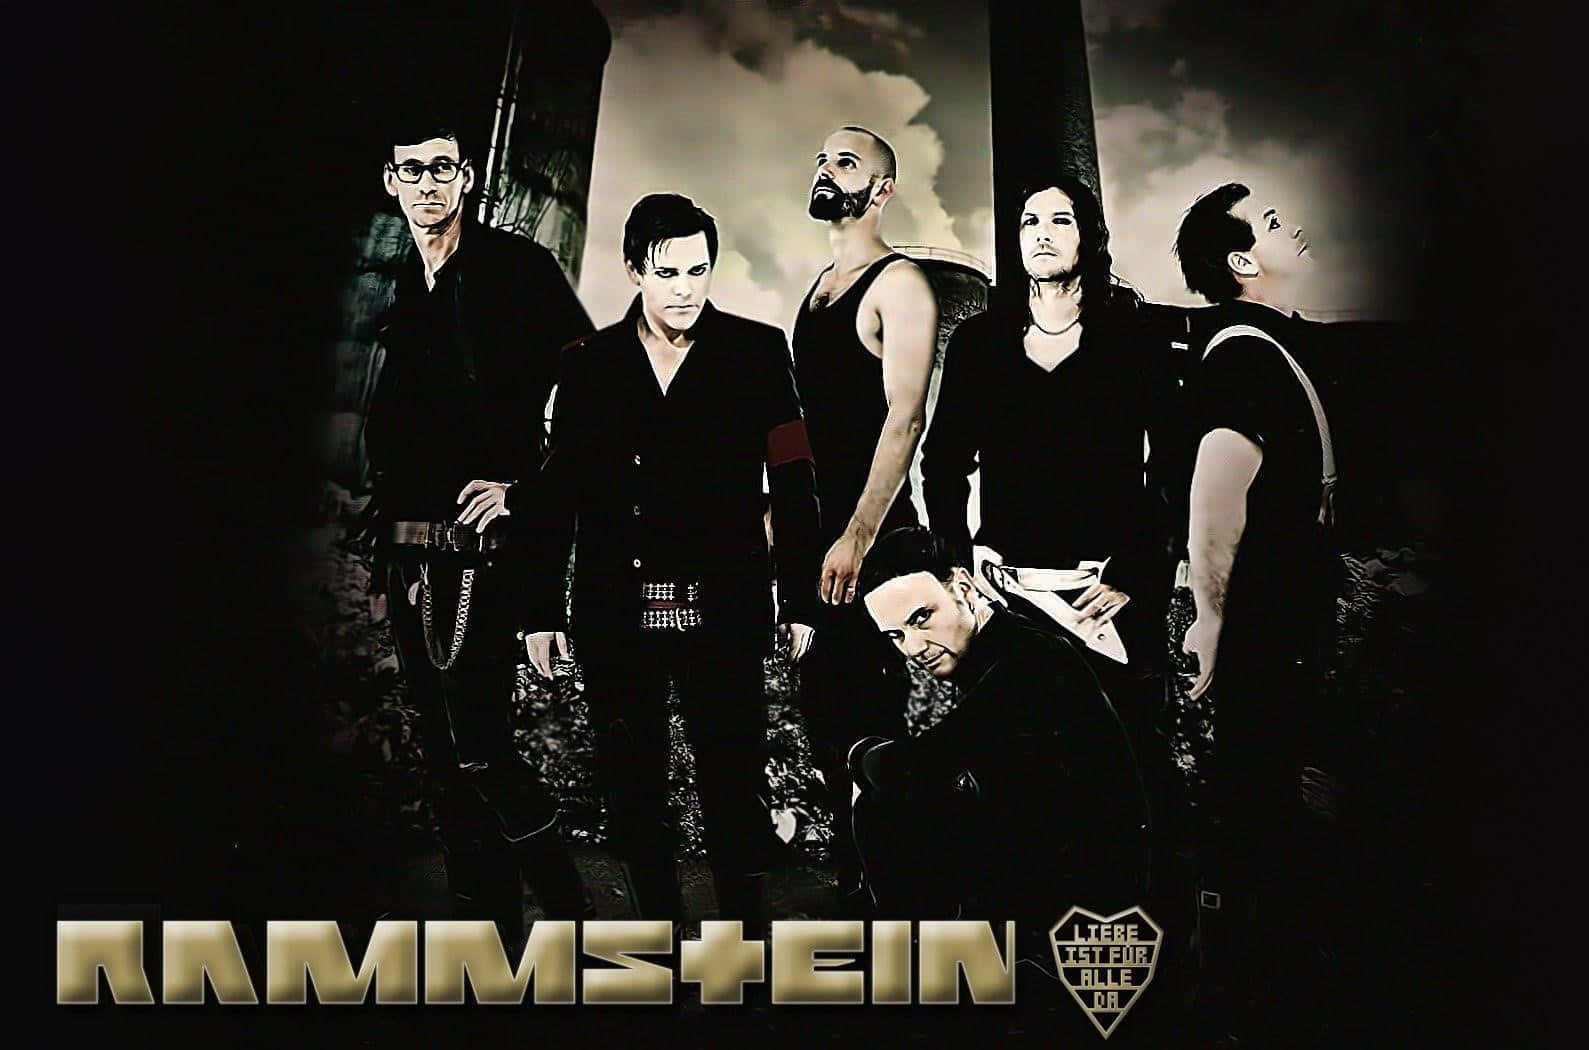 Rammstein Band Promotional Photo Background